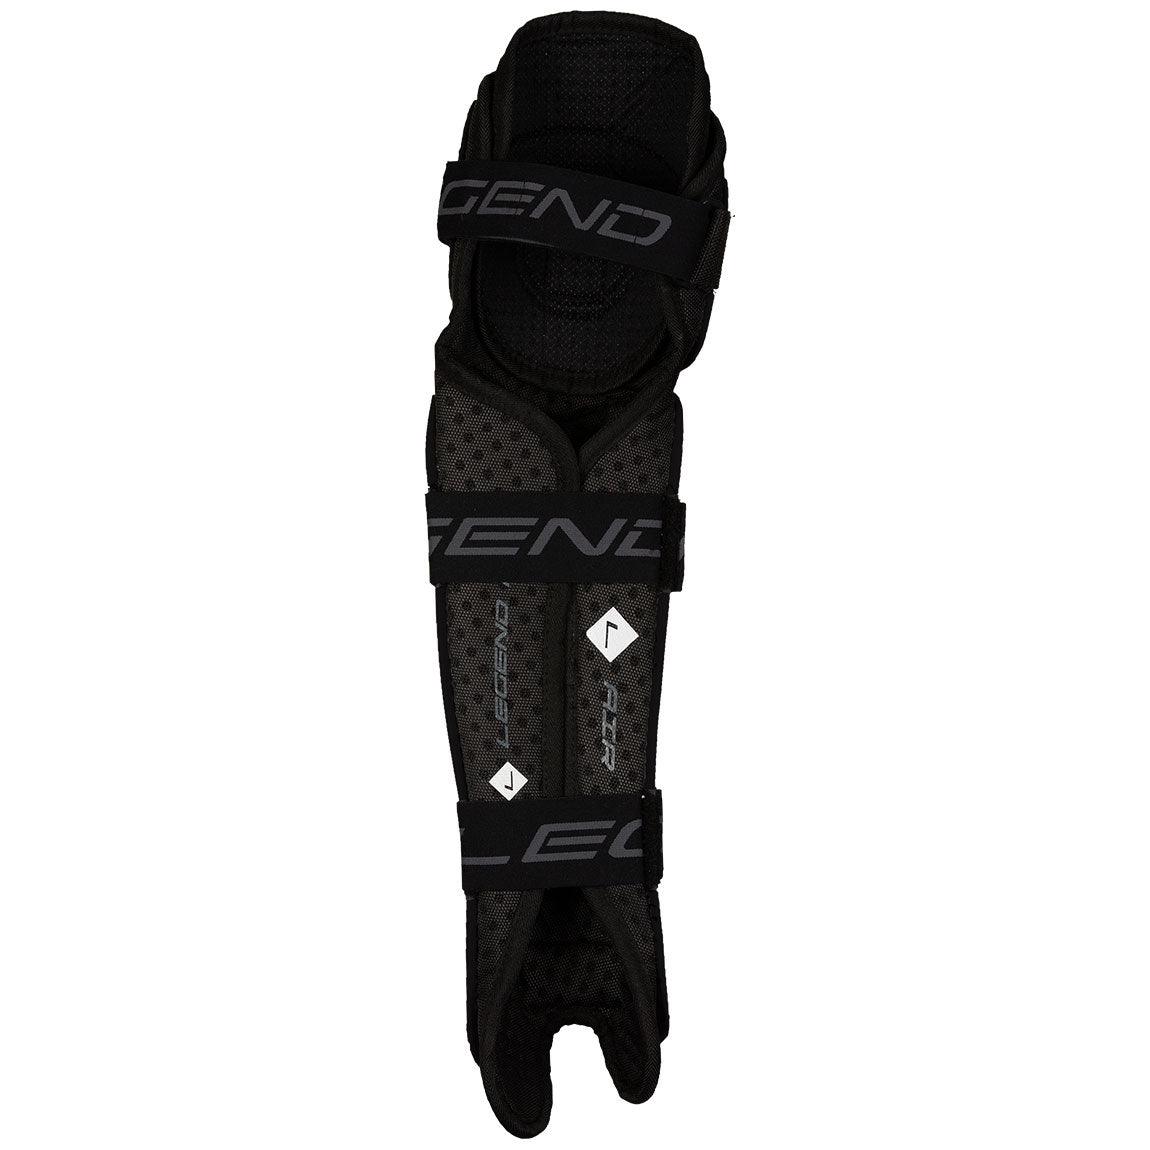 HP1 / AIR Shin guards - Youth - Sports Excellence